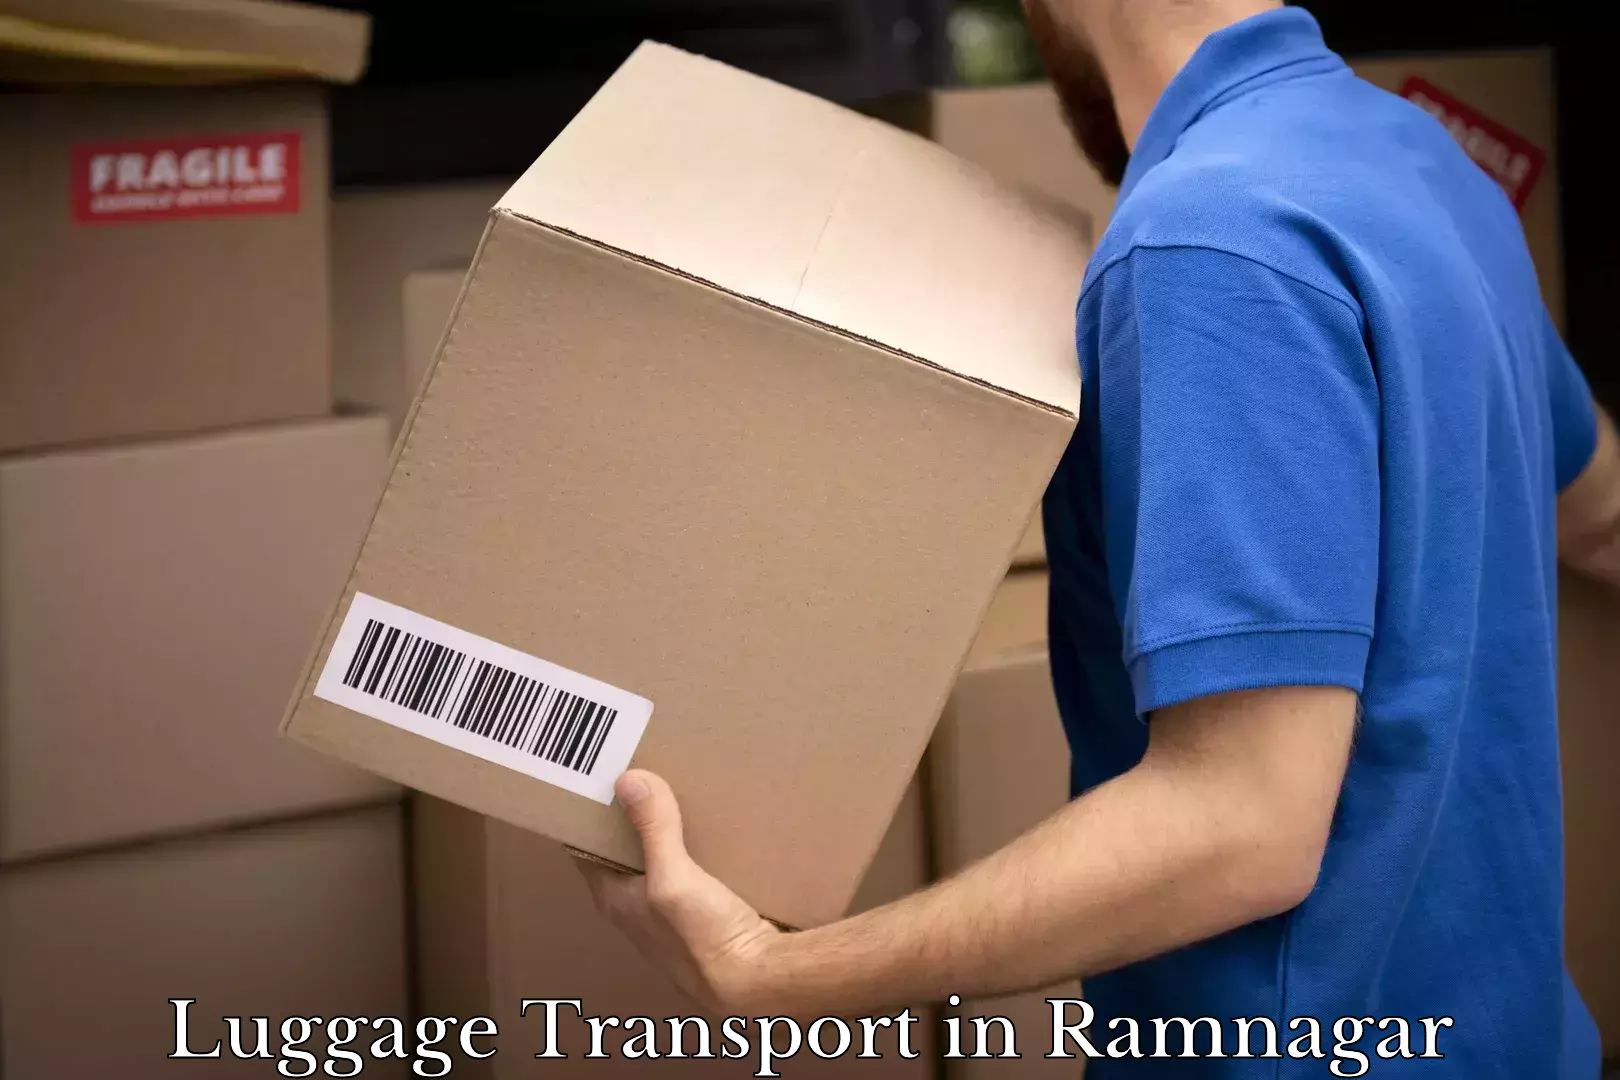 Baggage delivery support in Ramnagar